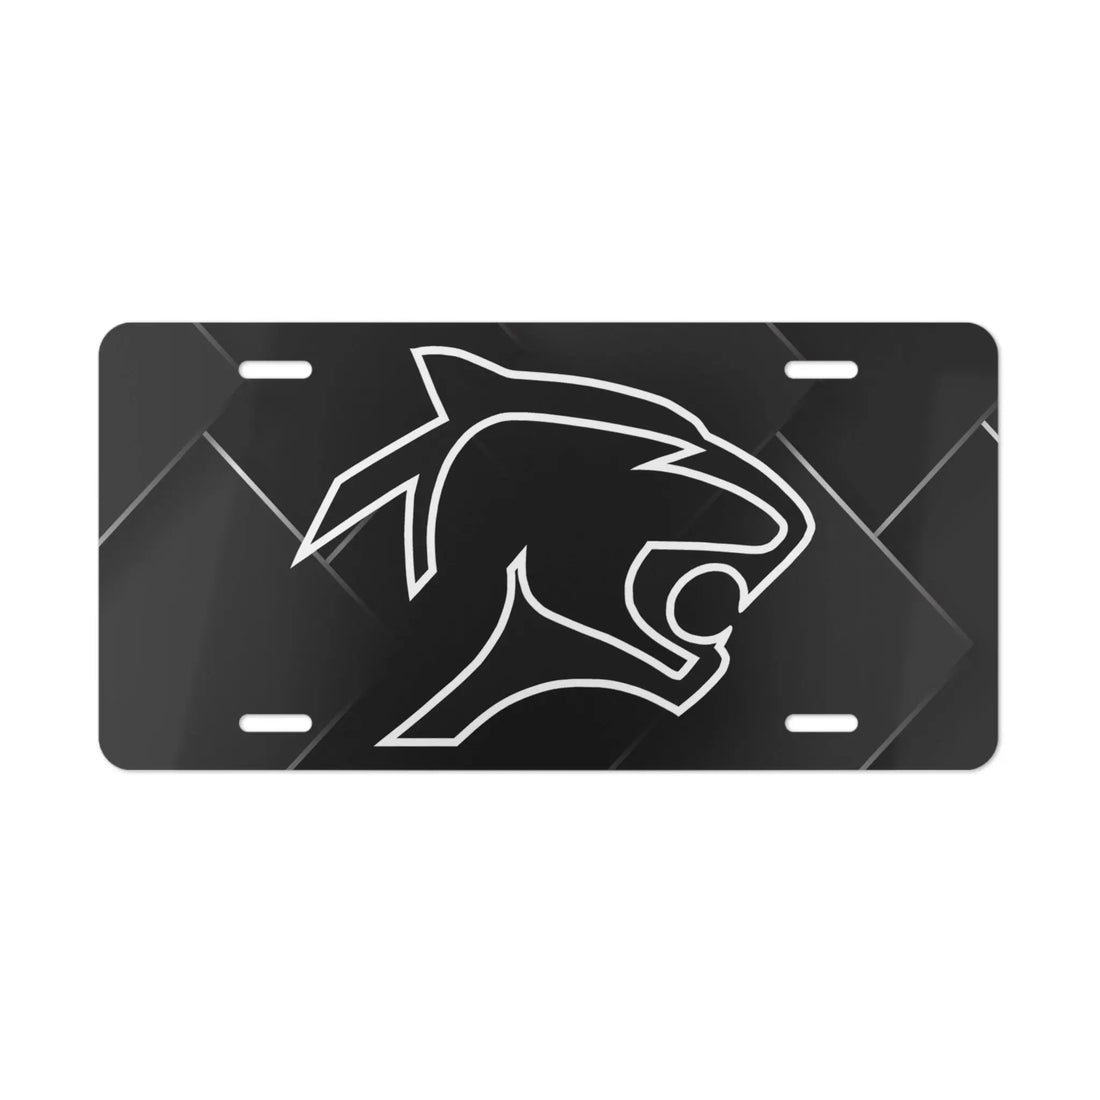 Black Panther Plate - Accessories - Positively Sassy - Black Panther Plate